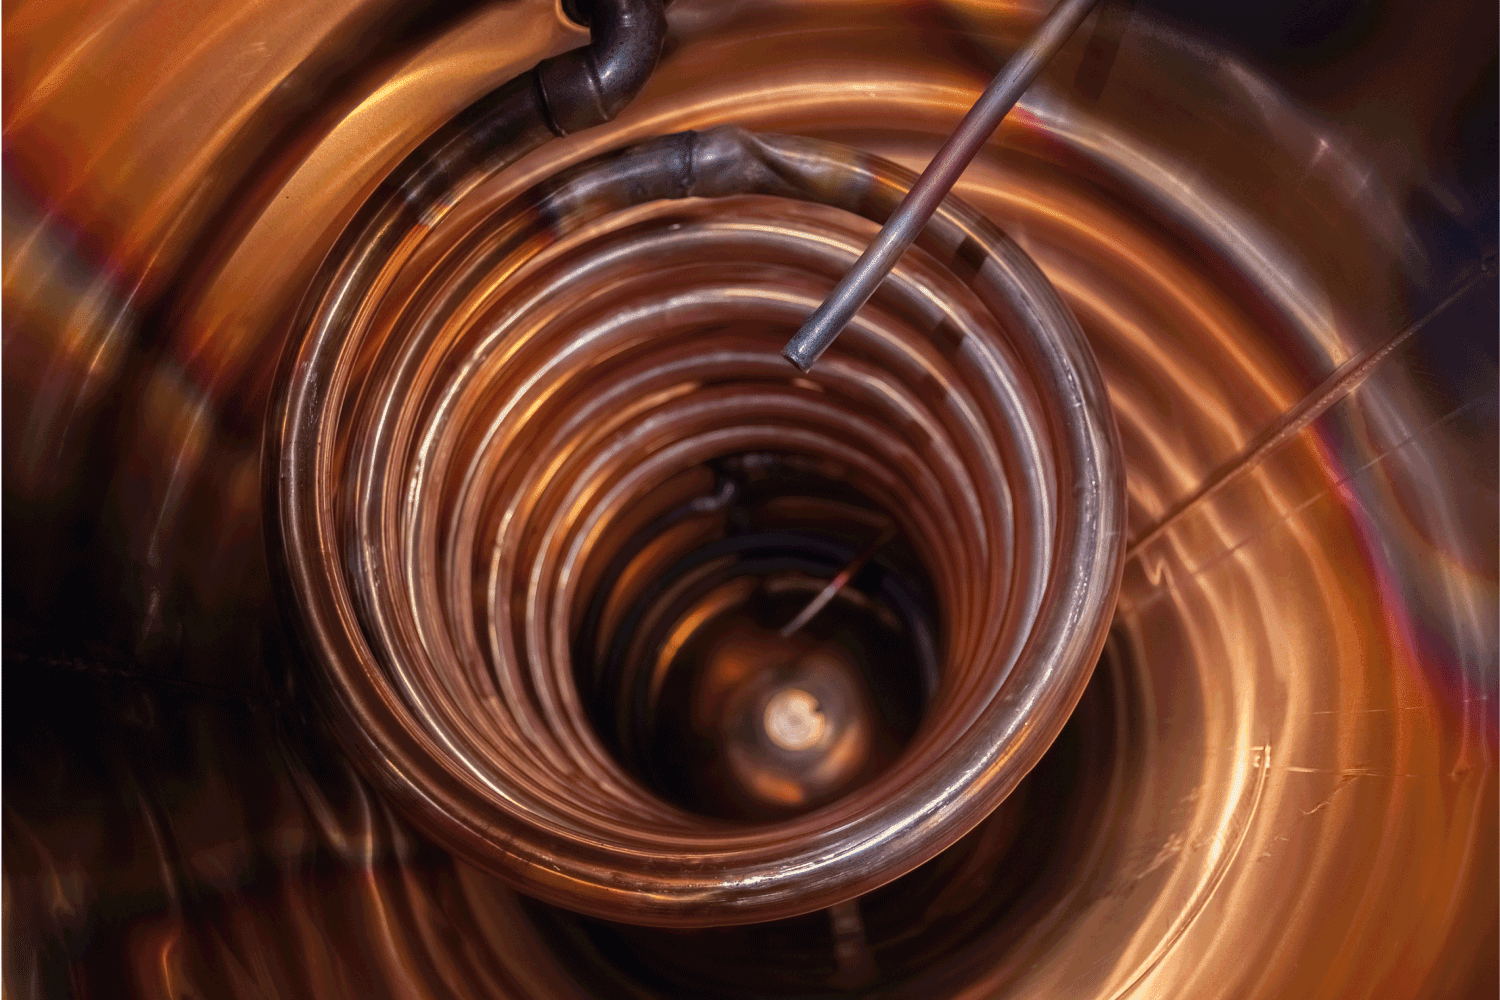 A copper coil winds its way through a hot water cylinder or tank. Hot water from the boiler, furnace, hot water solar thermal panels or other heat source travels through the coil